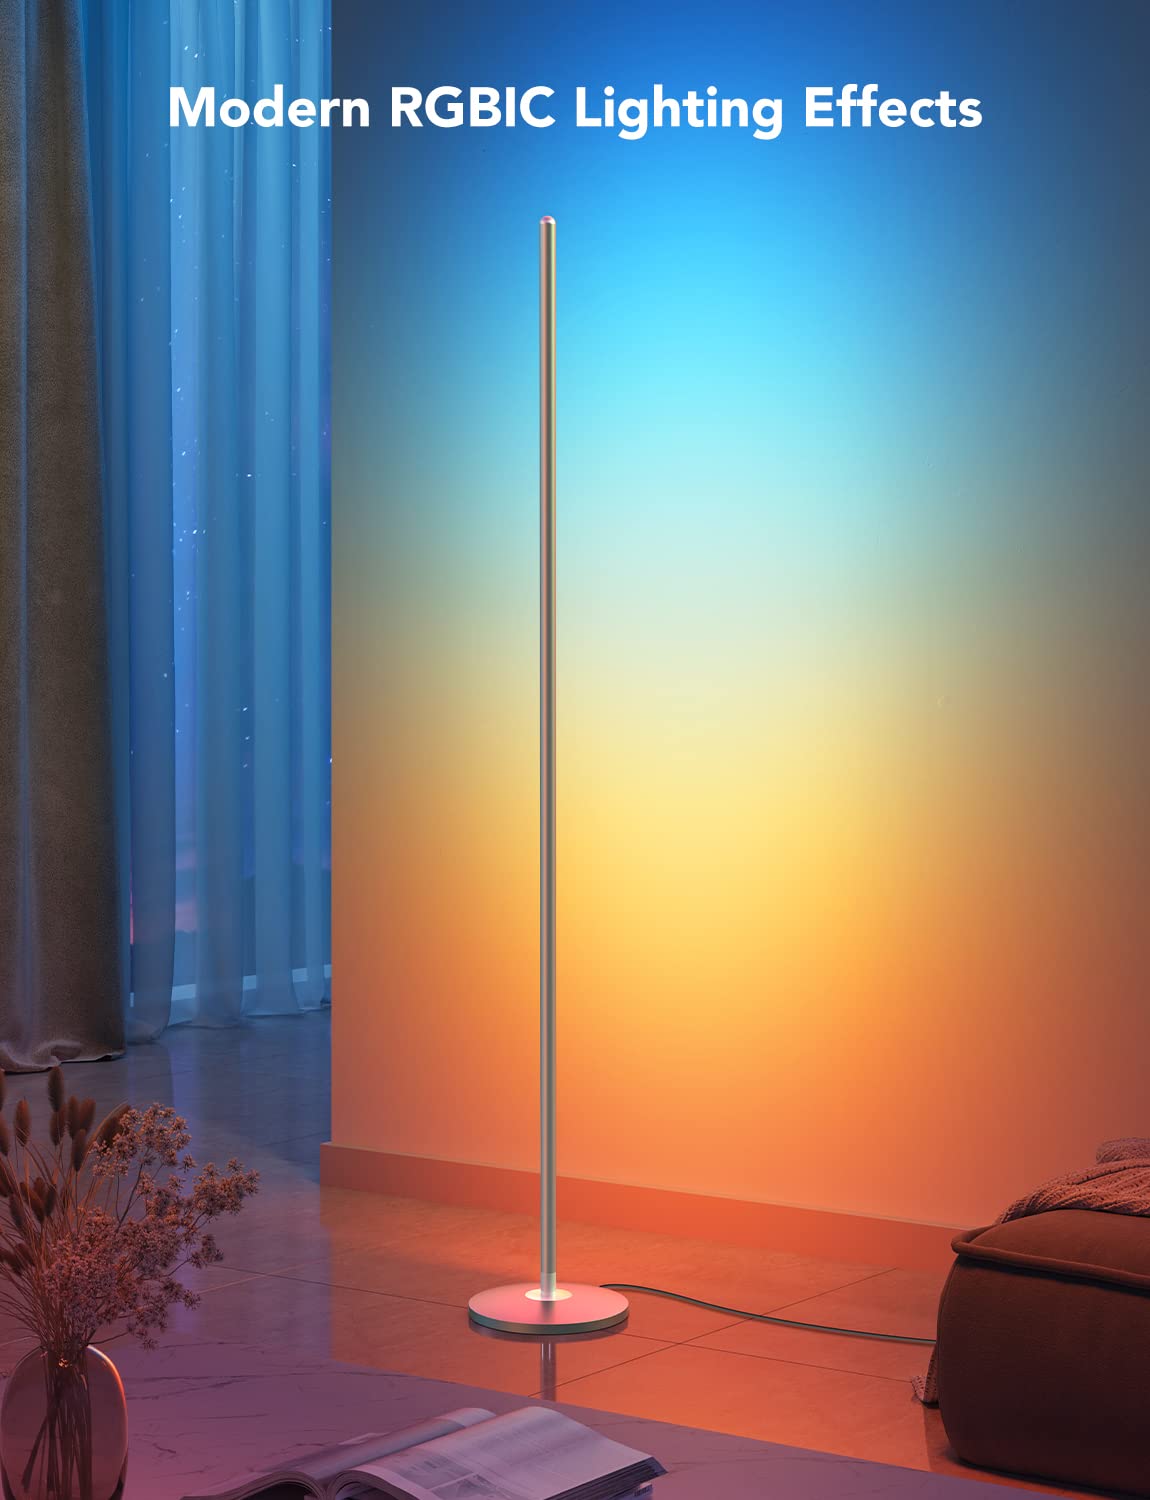 Govee RGBIC Floor Lamp, LED Corner Lamp Works with Alexa, Smart Modern Floor Lamp with Music Sync and 16 Million DIY Colors, Ambiance Color Changing Standing Lamp for Bedroom Living Room Silver